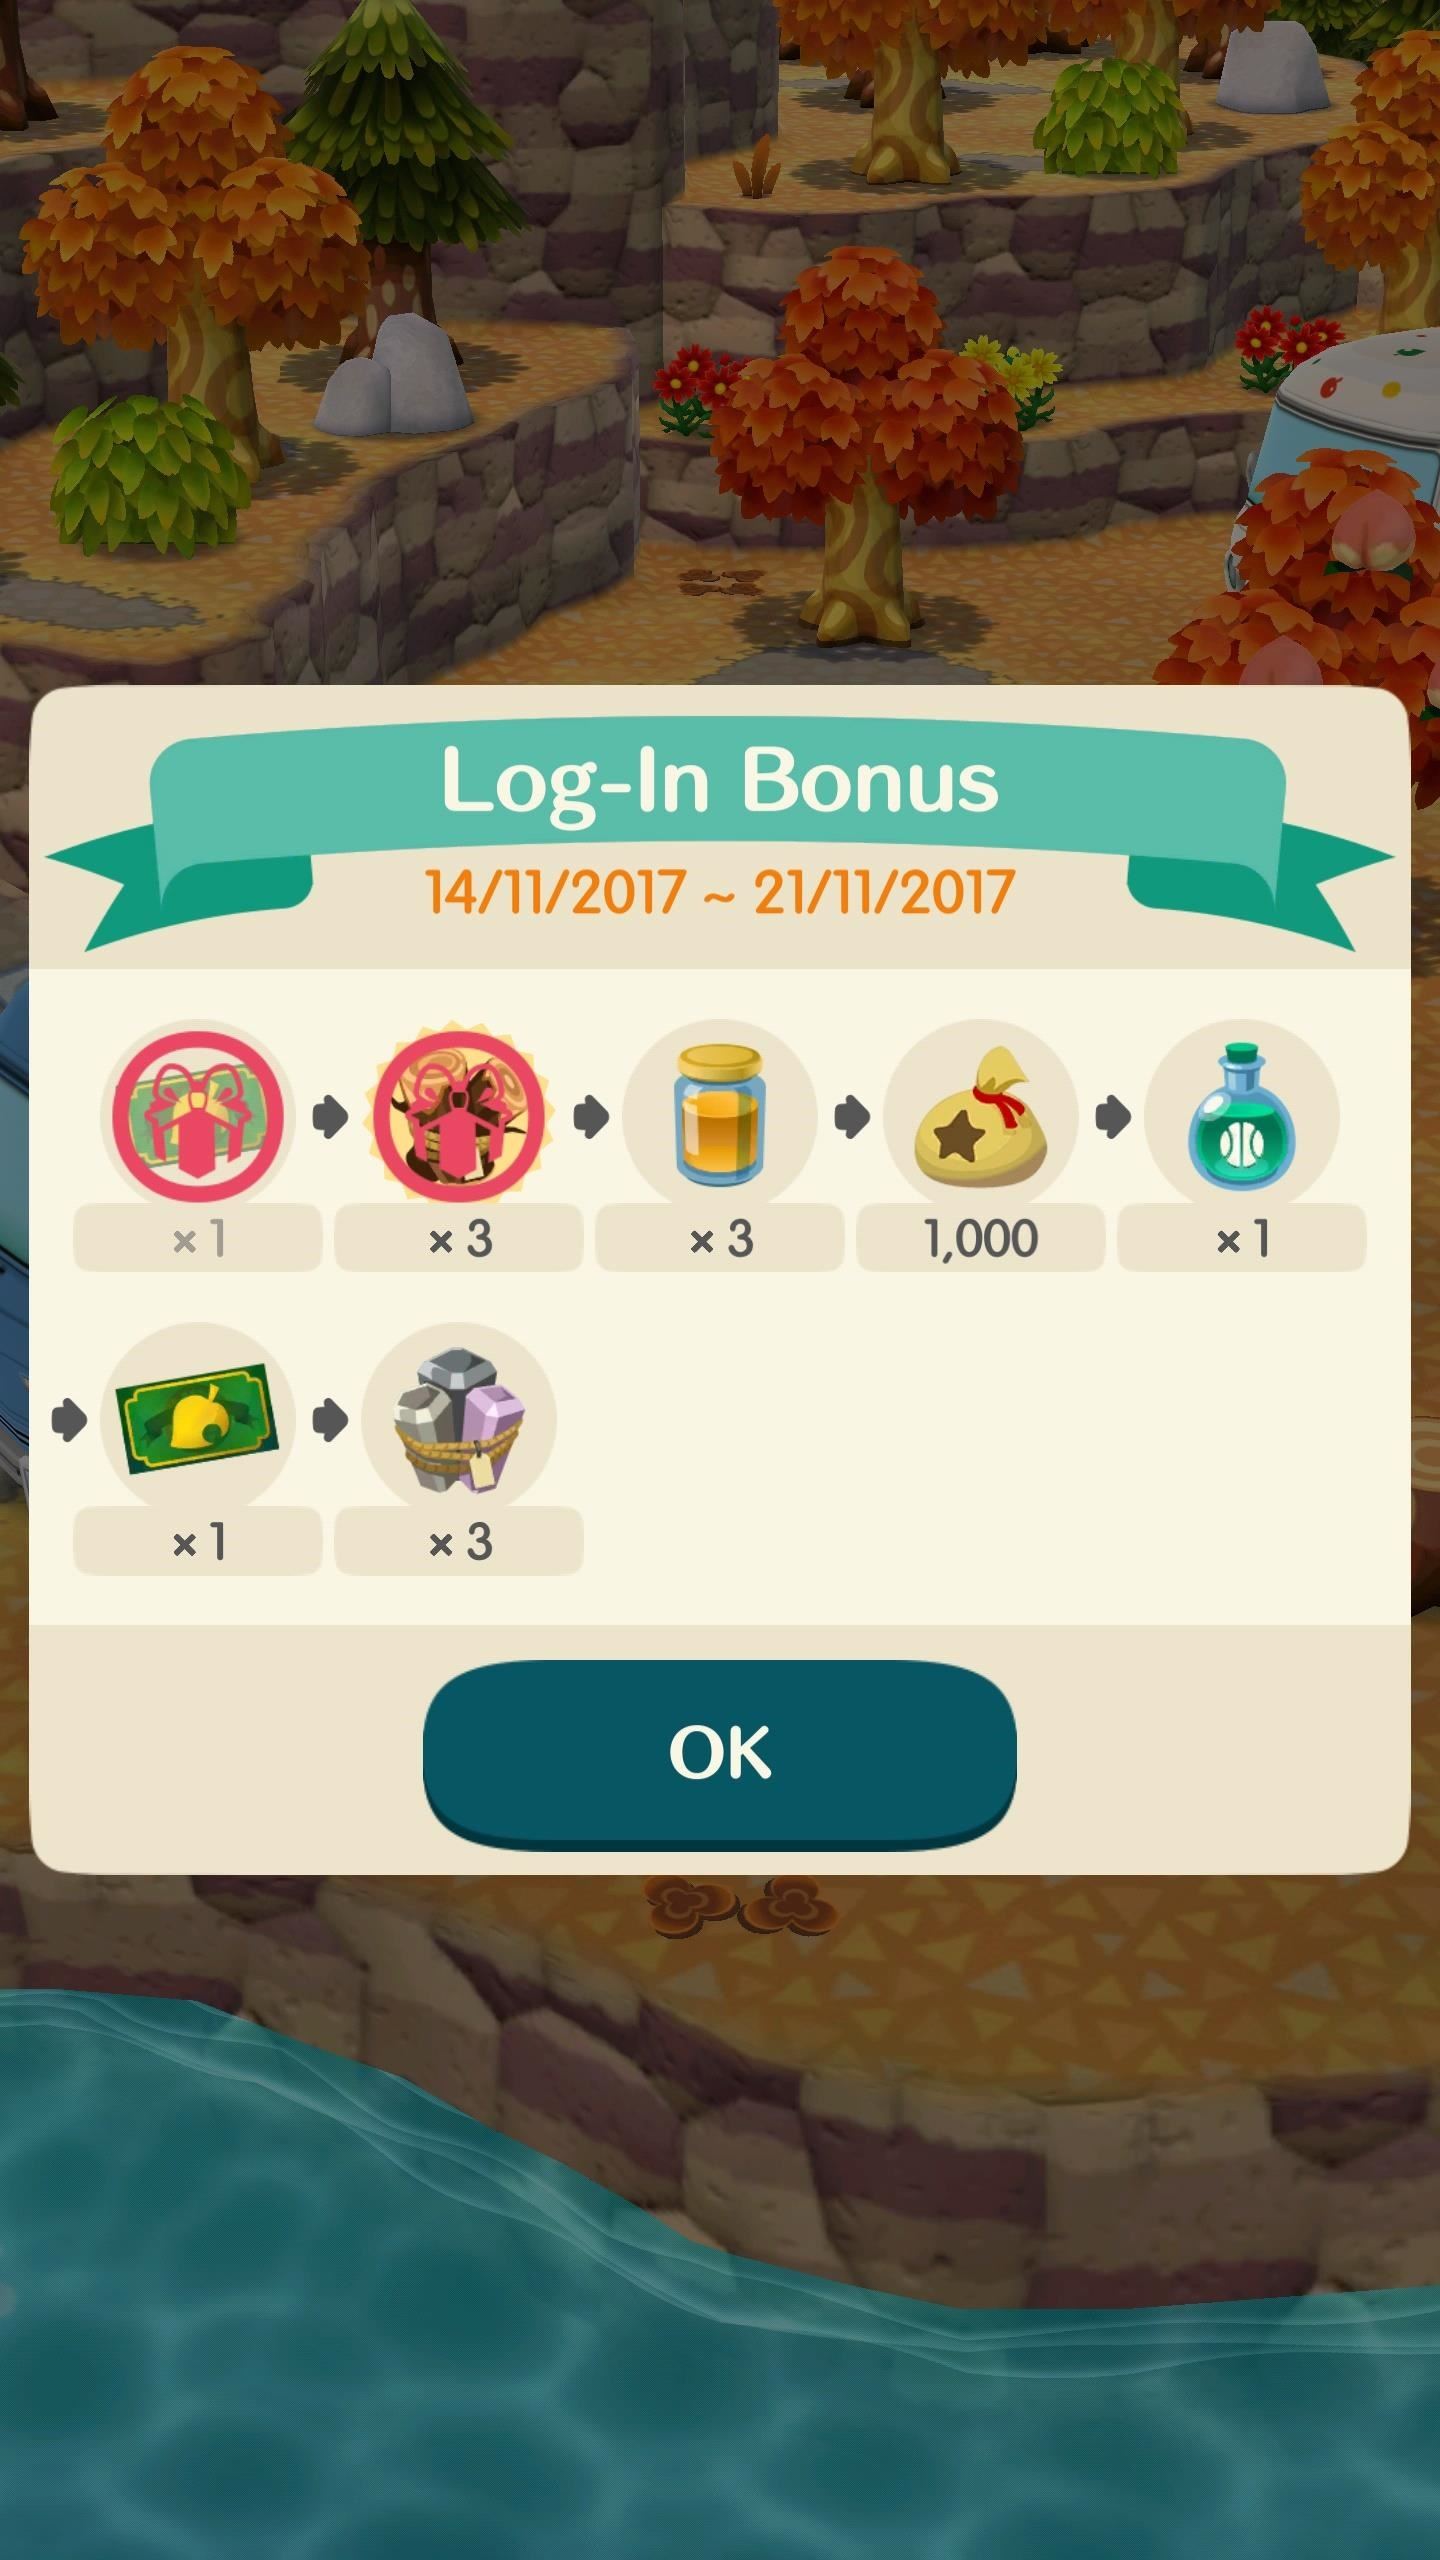 Pocket Camp 101: How to Build Up Supplies in Animal Crossing